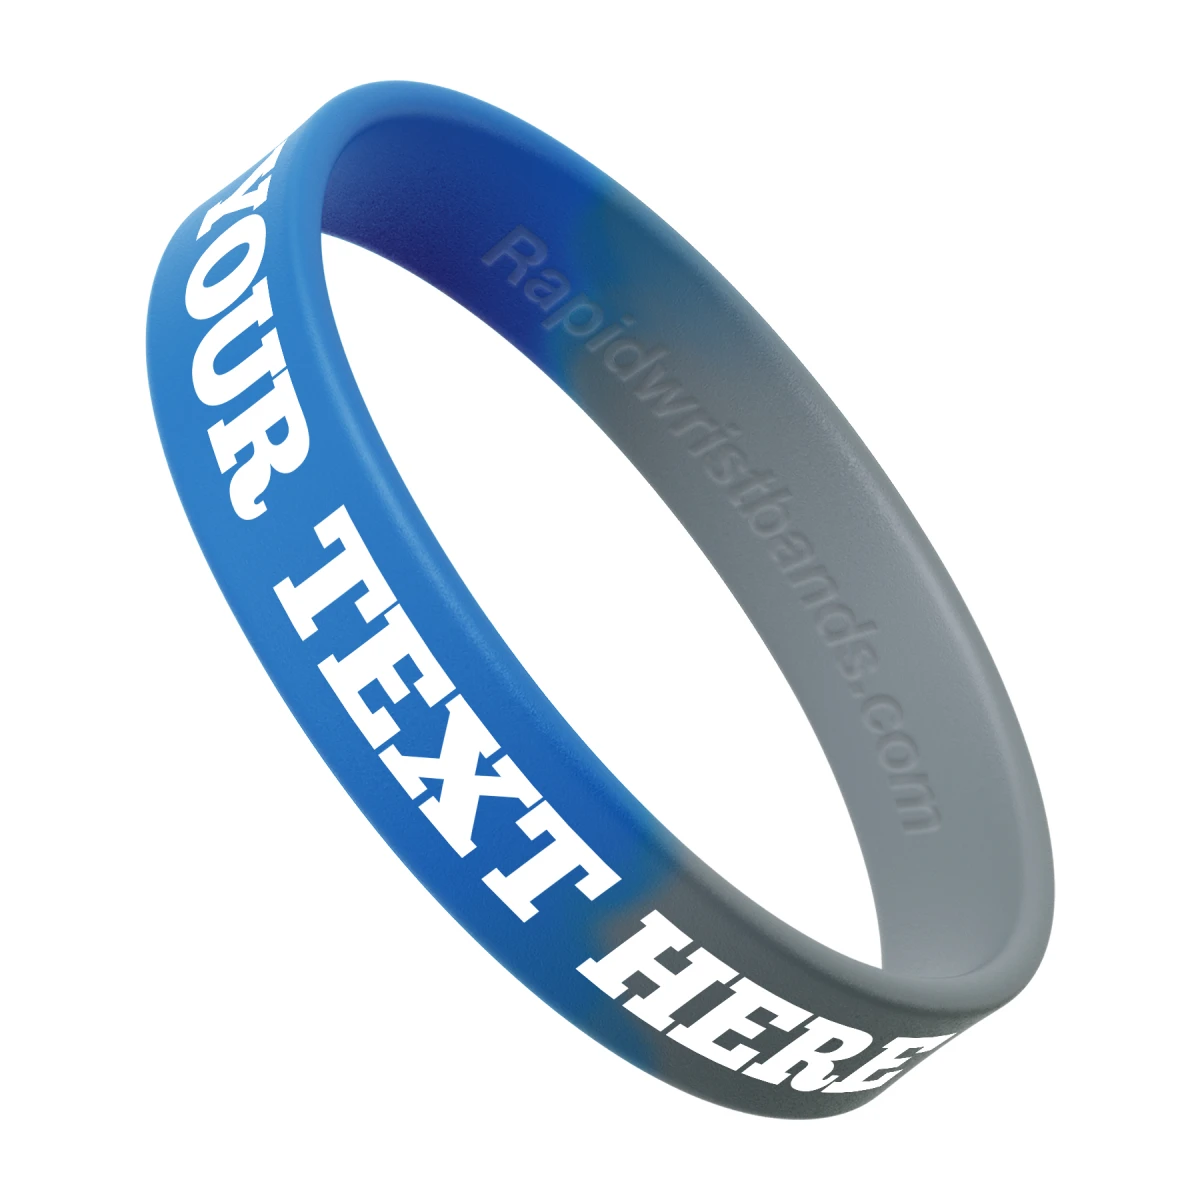 Segmented Blue/Gray Wristband With Your Text Here Printed In White